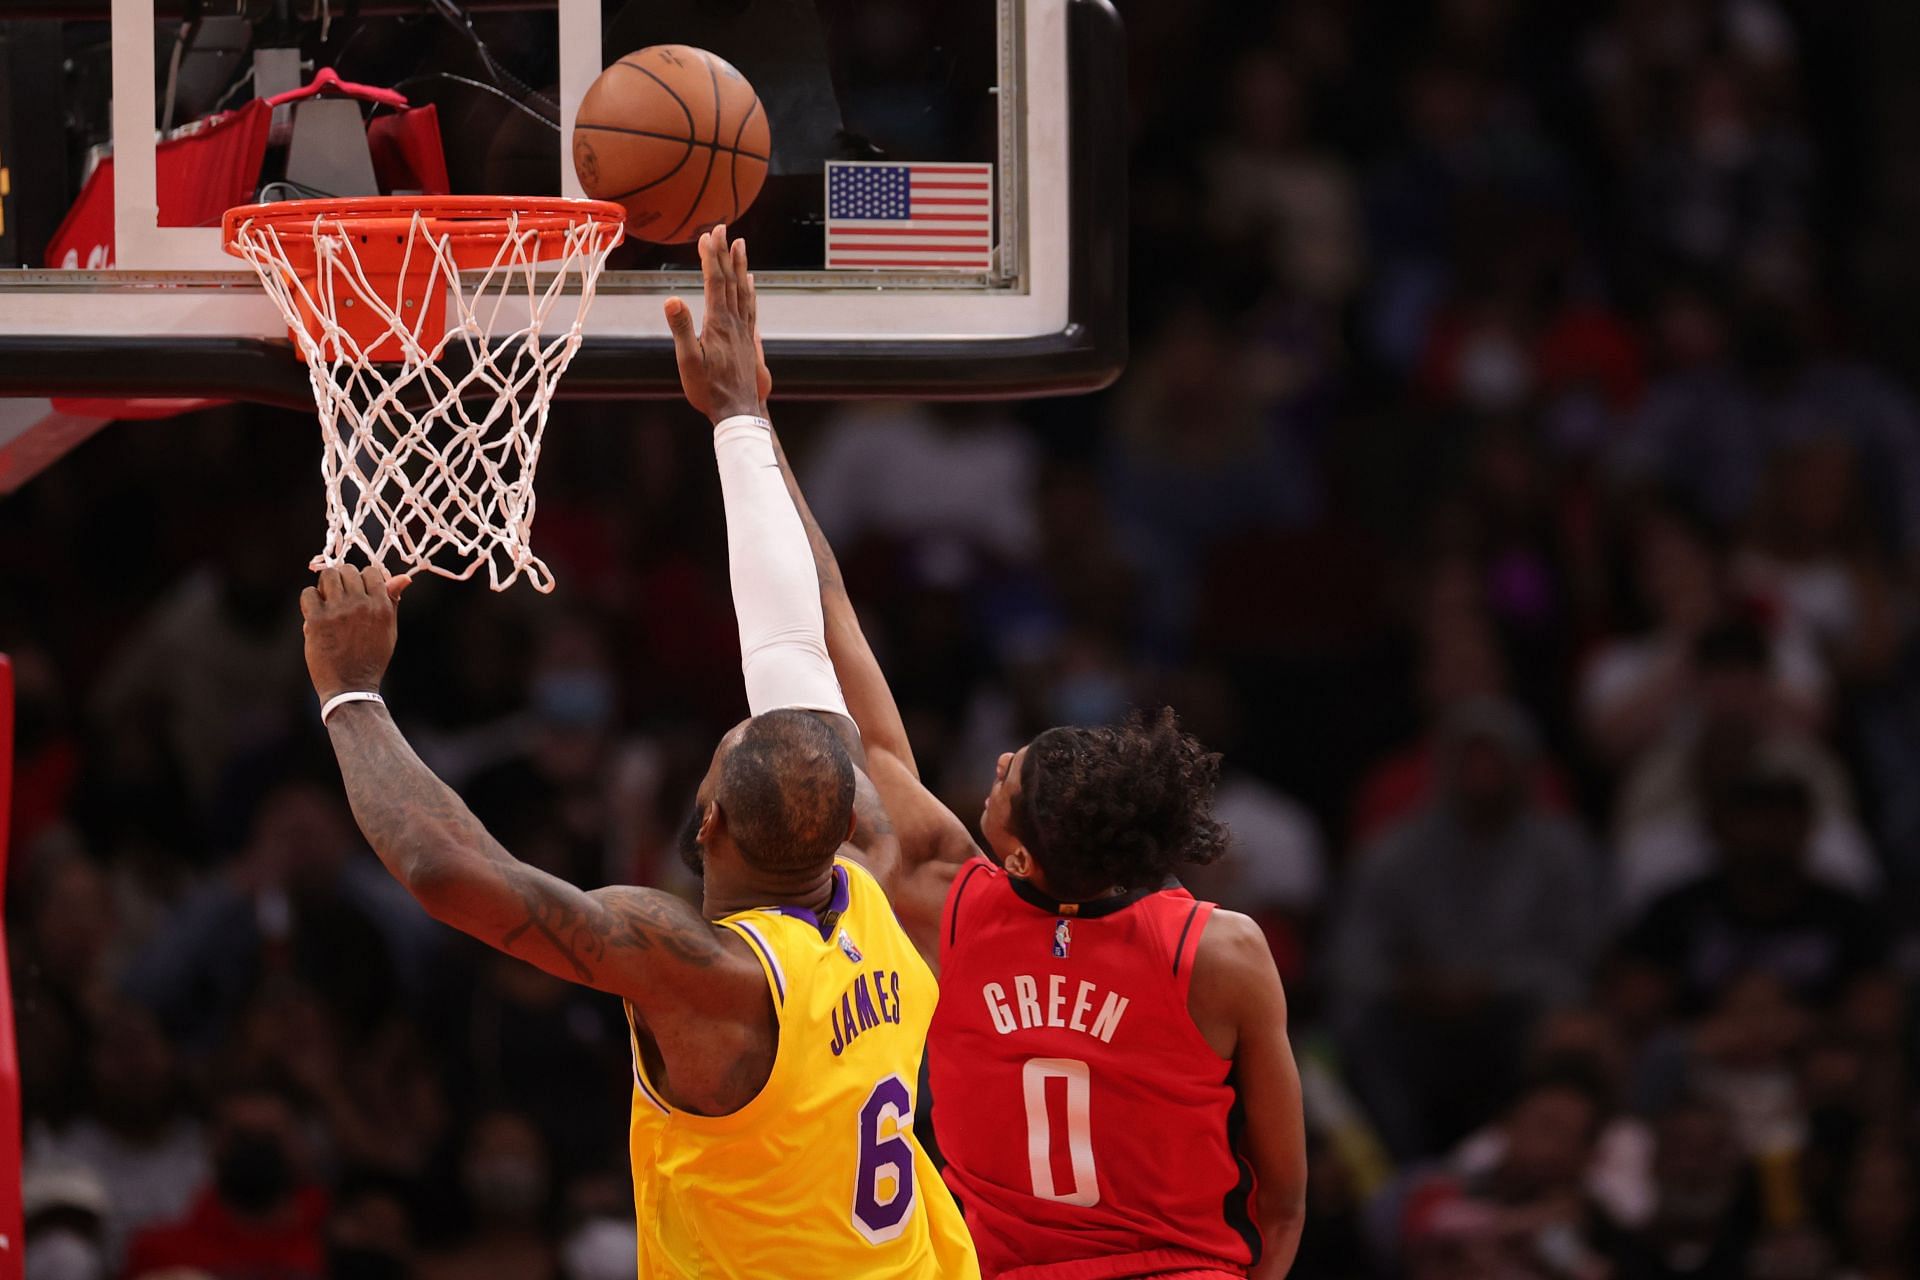 Los Angeles Lakers center LeBron James defends a shot from Jalen Green of the Houston Rockets